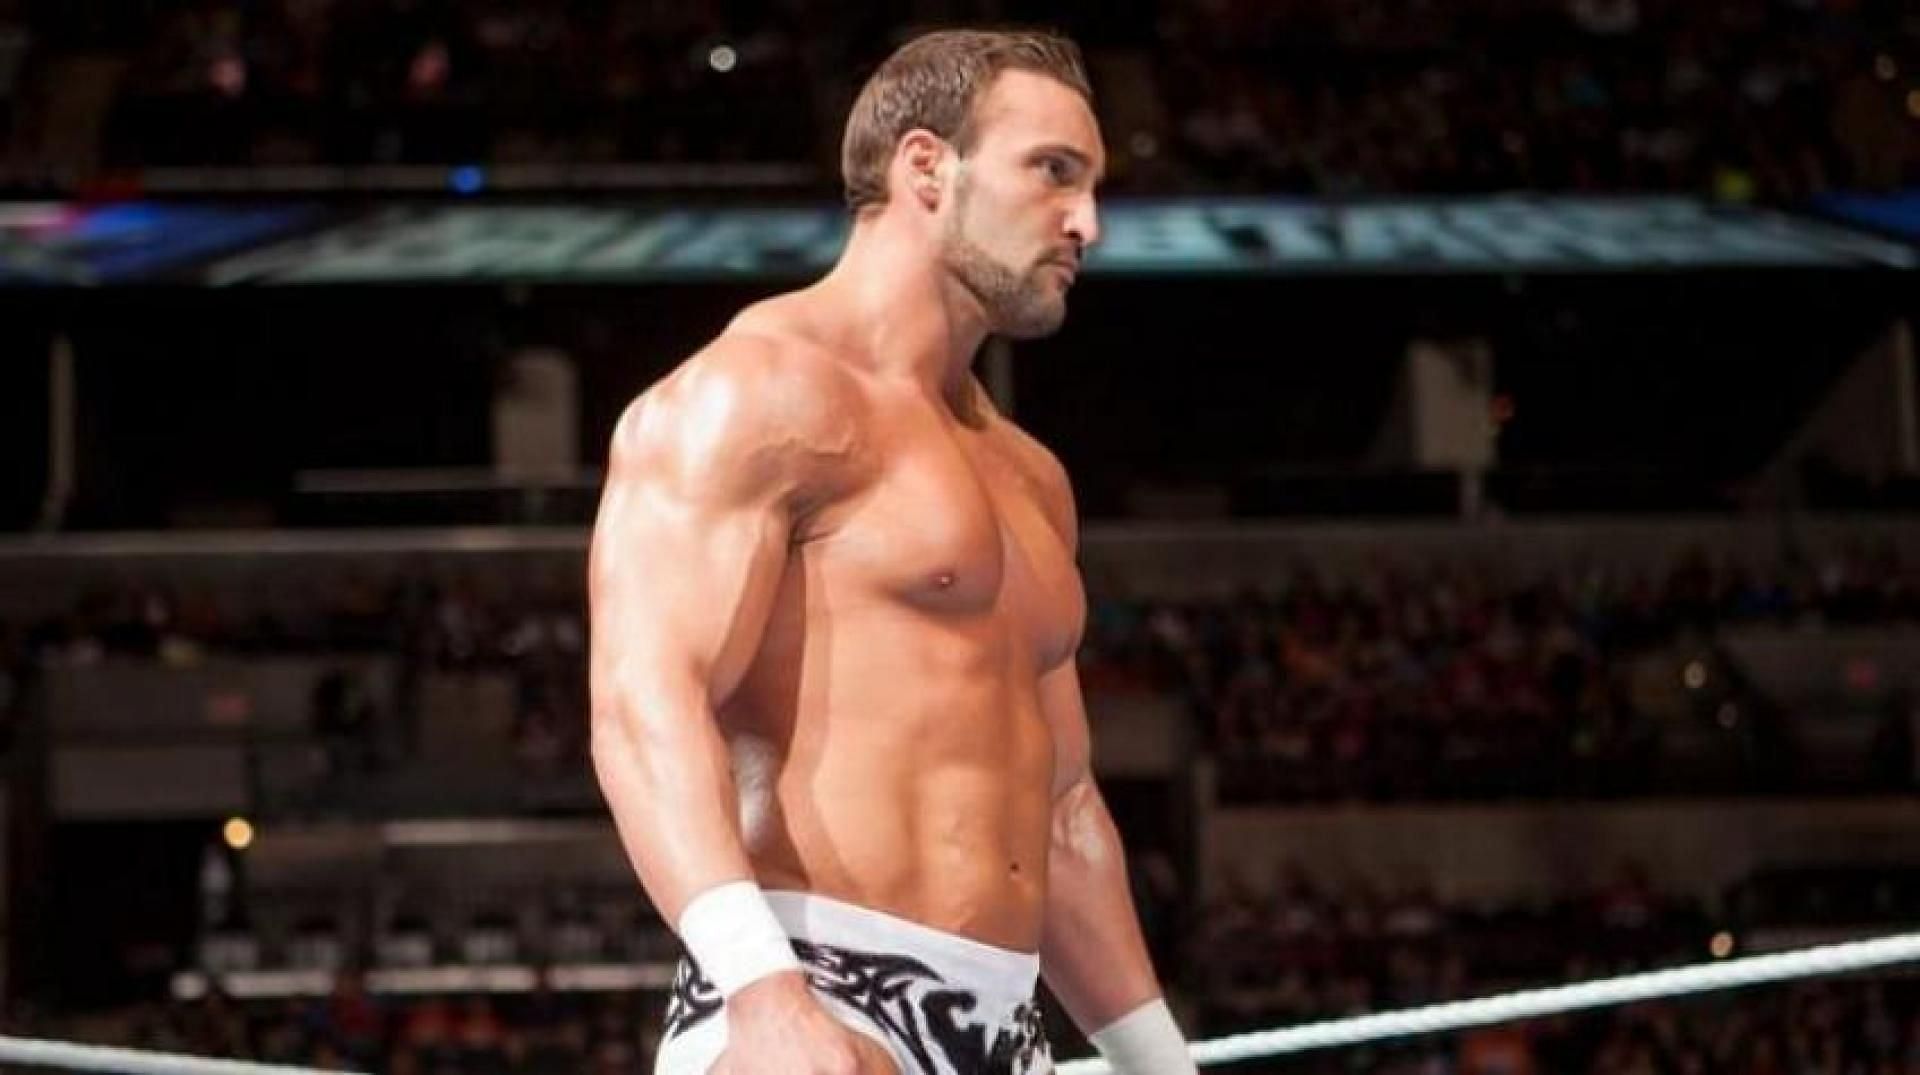 Chris Masters debuted in the WWE in 2005